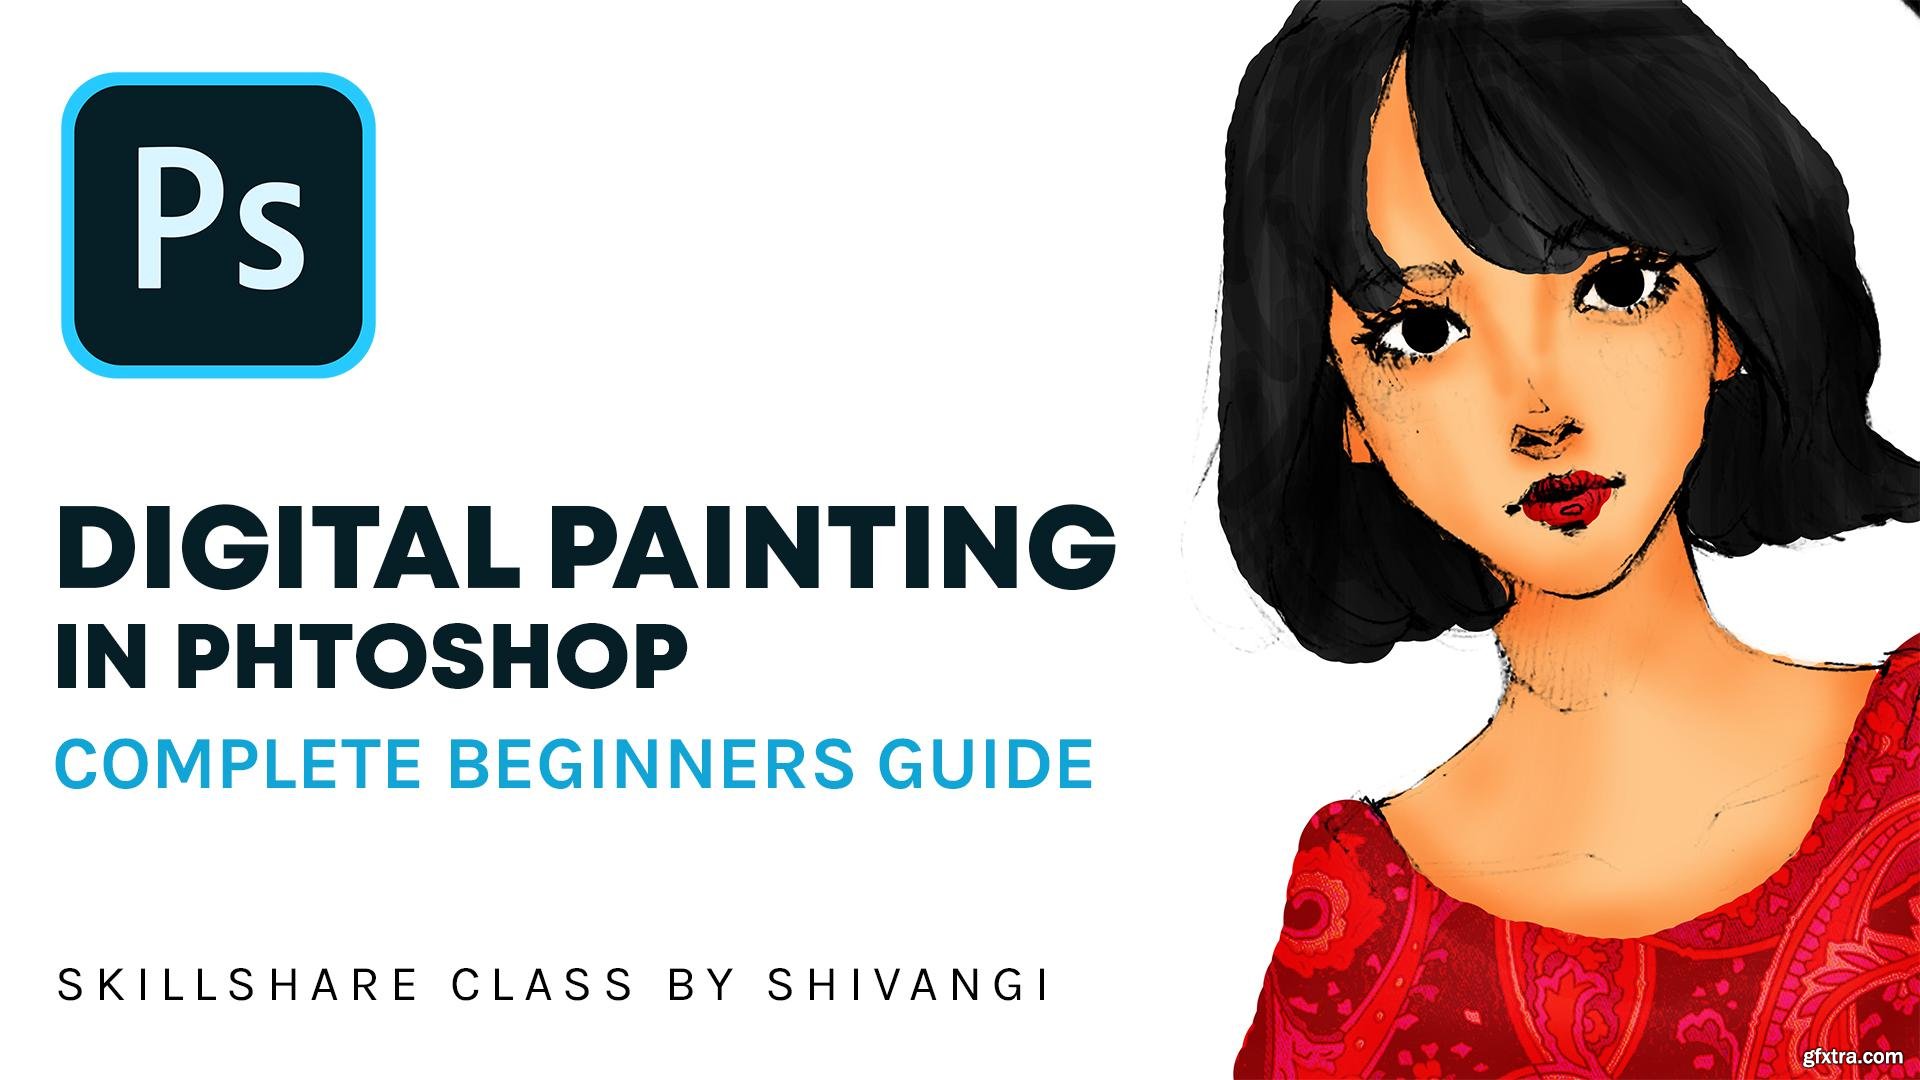 beginners guide to digital painting in photoshop download